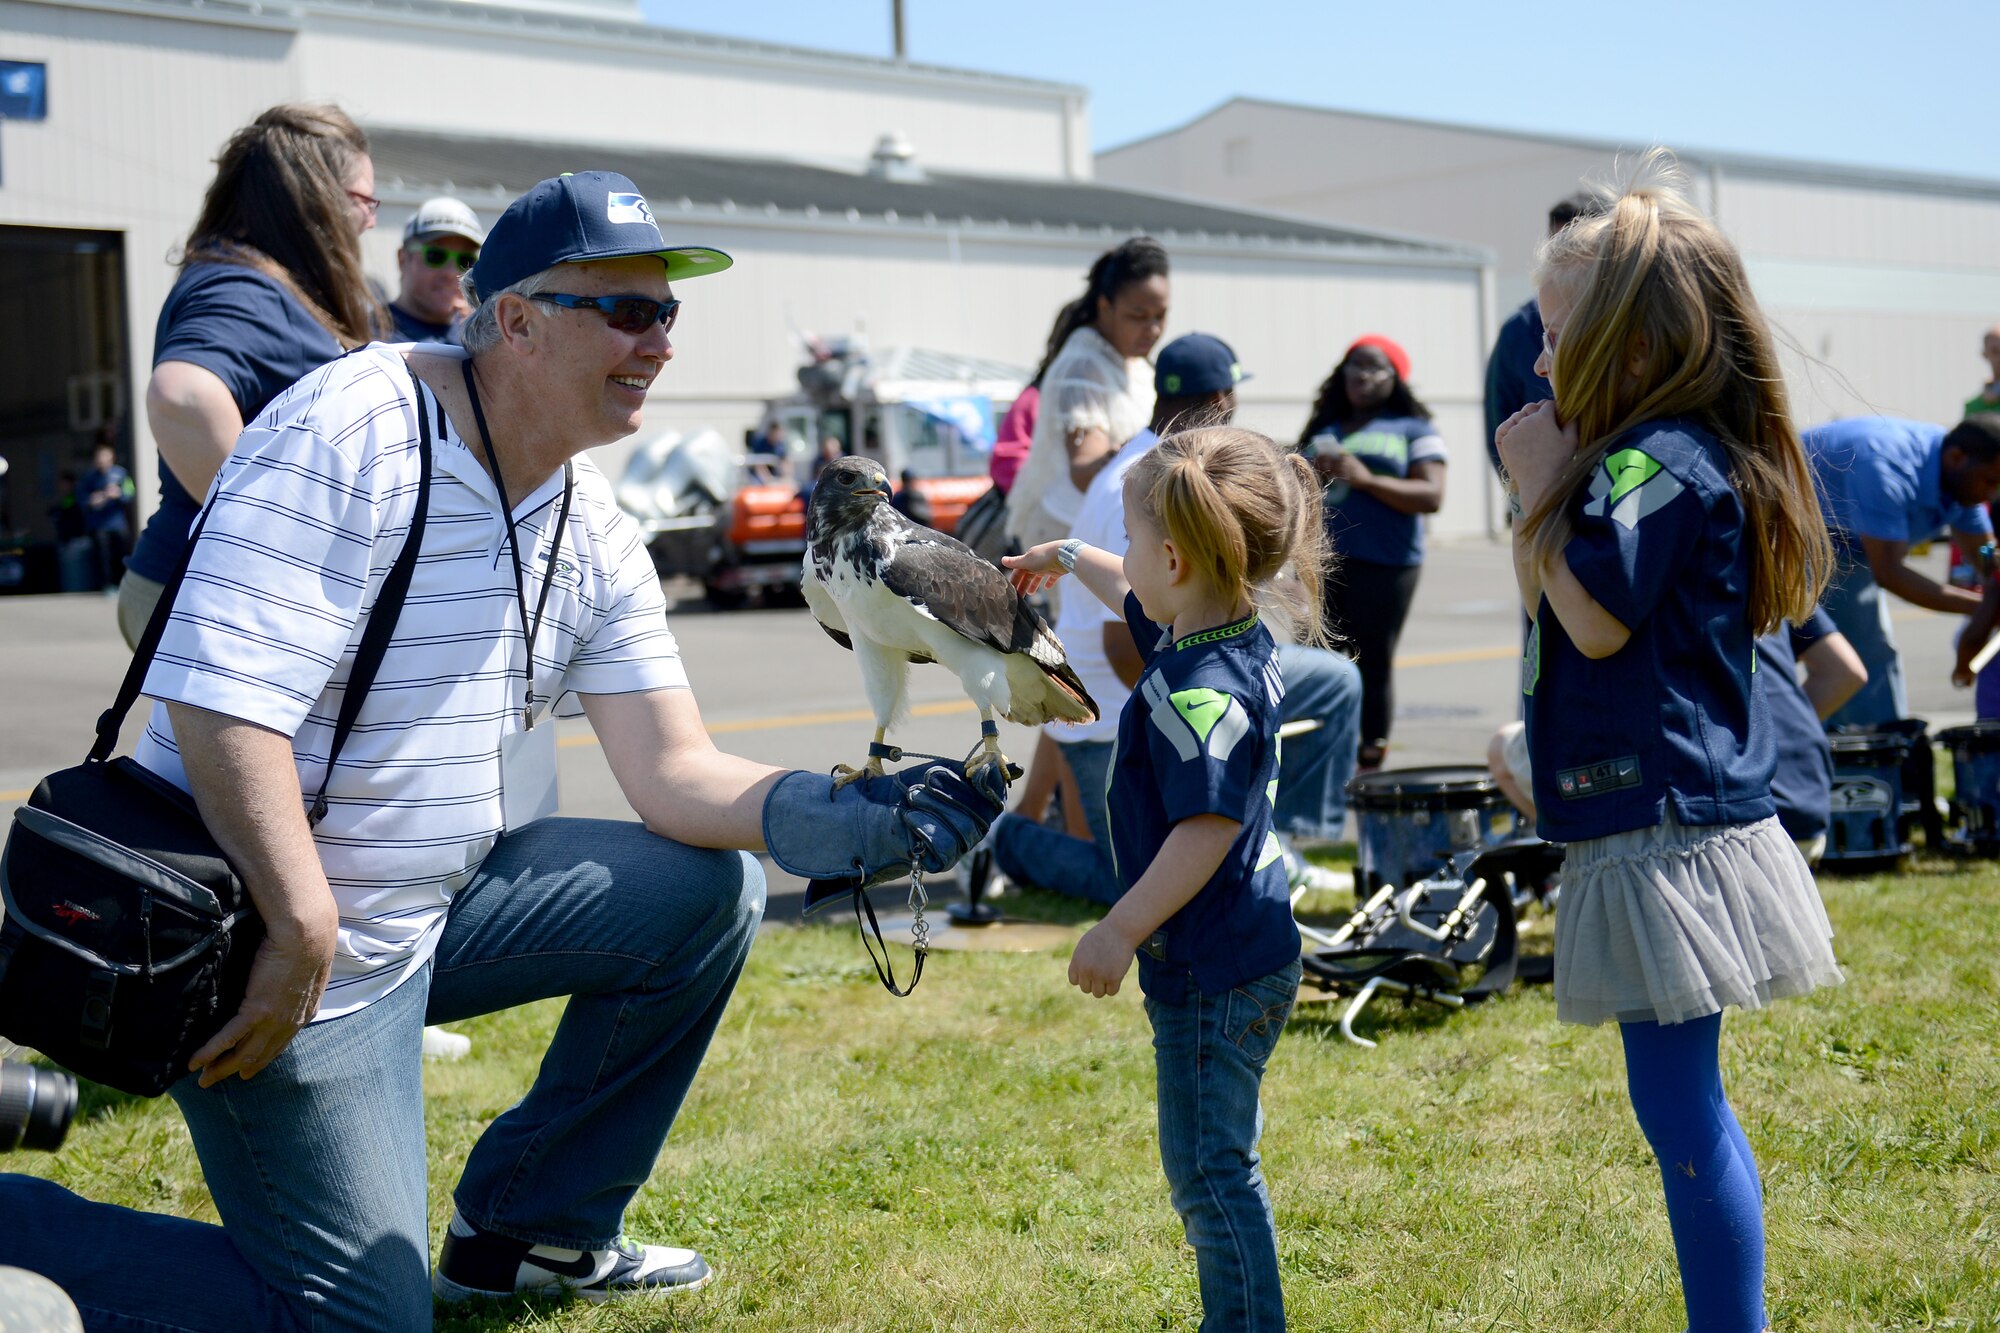 Children pet Tamia, the official hawk of the Seattle Seahawks May 2, 2015, during the Seattle Seahawks draft day event at Joint Base Lewis-McChord, Wash. During the event, attendees were able to play free games such as shooting arrows at floating targets, and also received free drinks and food. (U.S. Air Force photo/Airman 1st Class Keoni Chavarria)